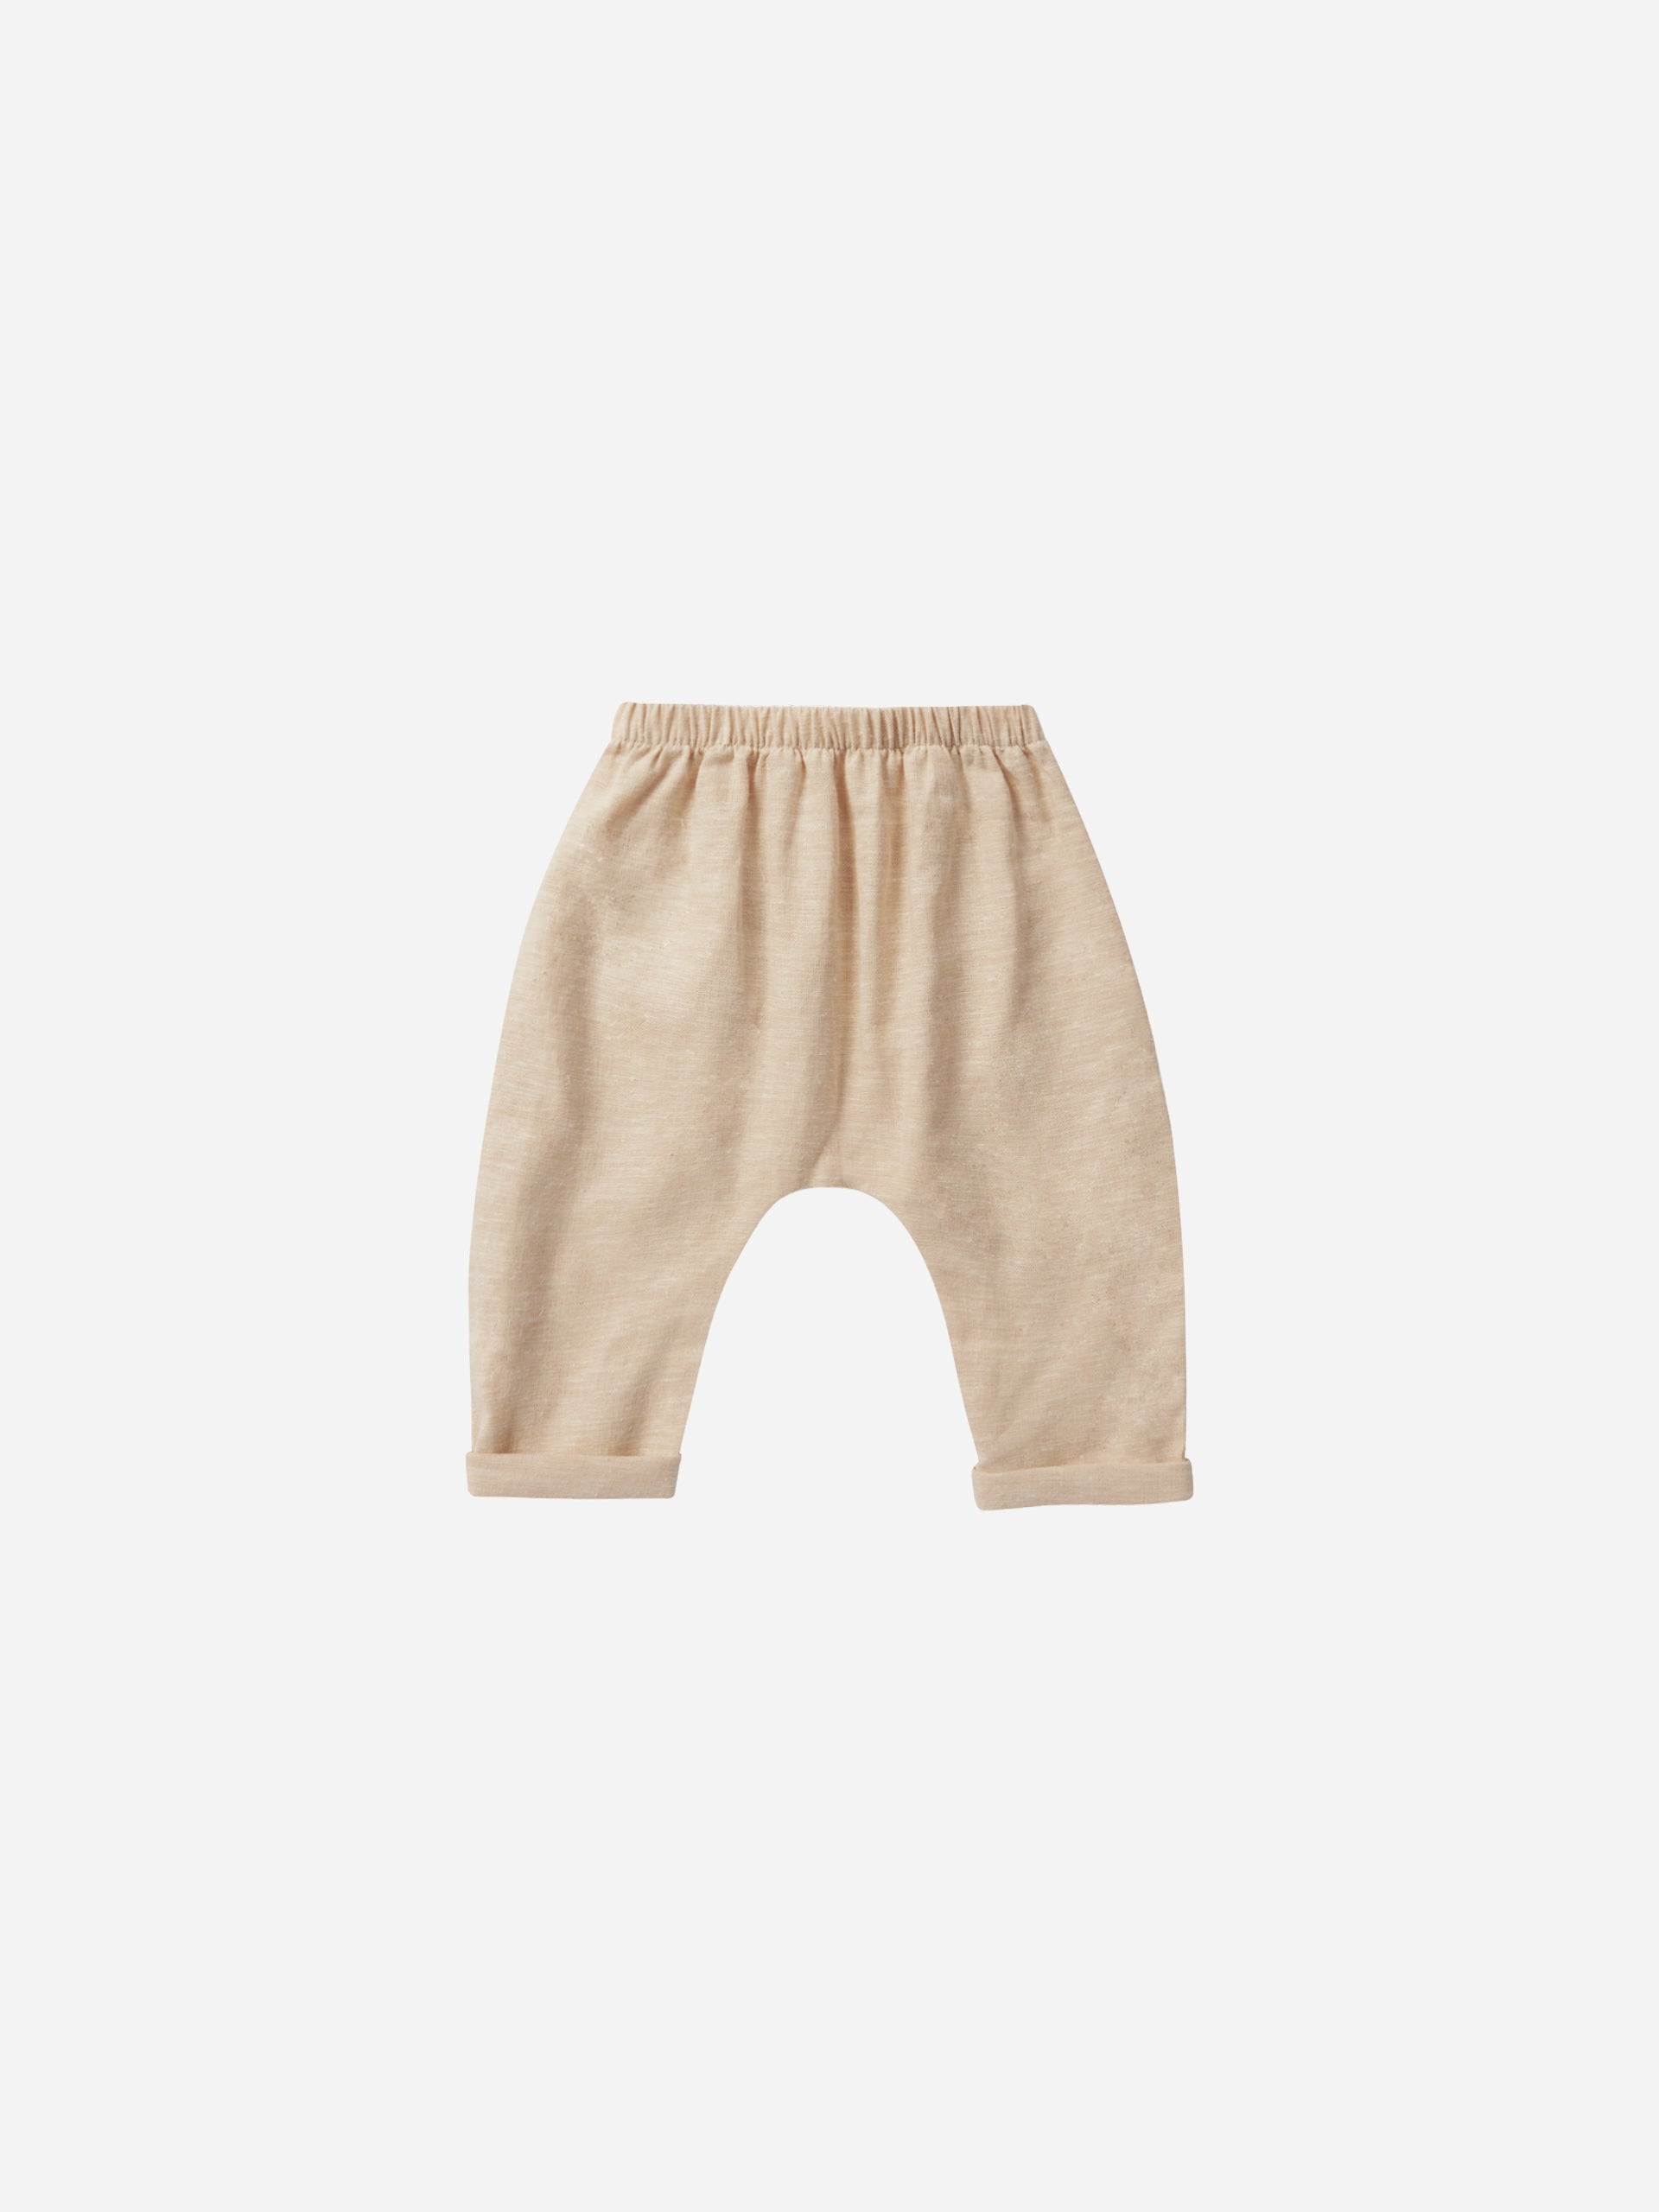 Rowan Pant || Heathered Sand - Rylee + Cru | Kids Clothes | Trendy Baby Clothes | Modern Infant Outfits |